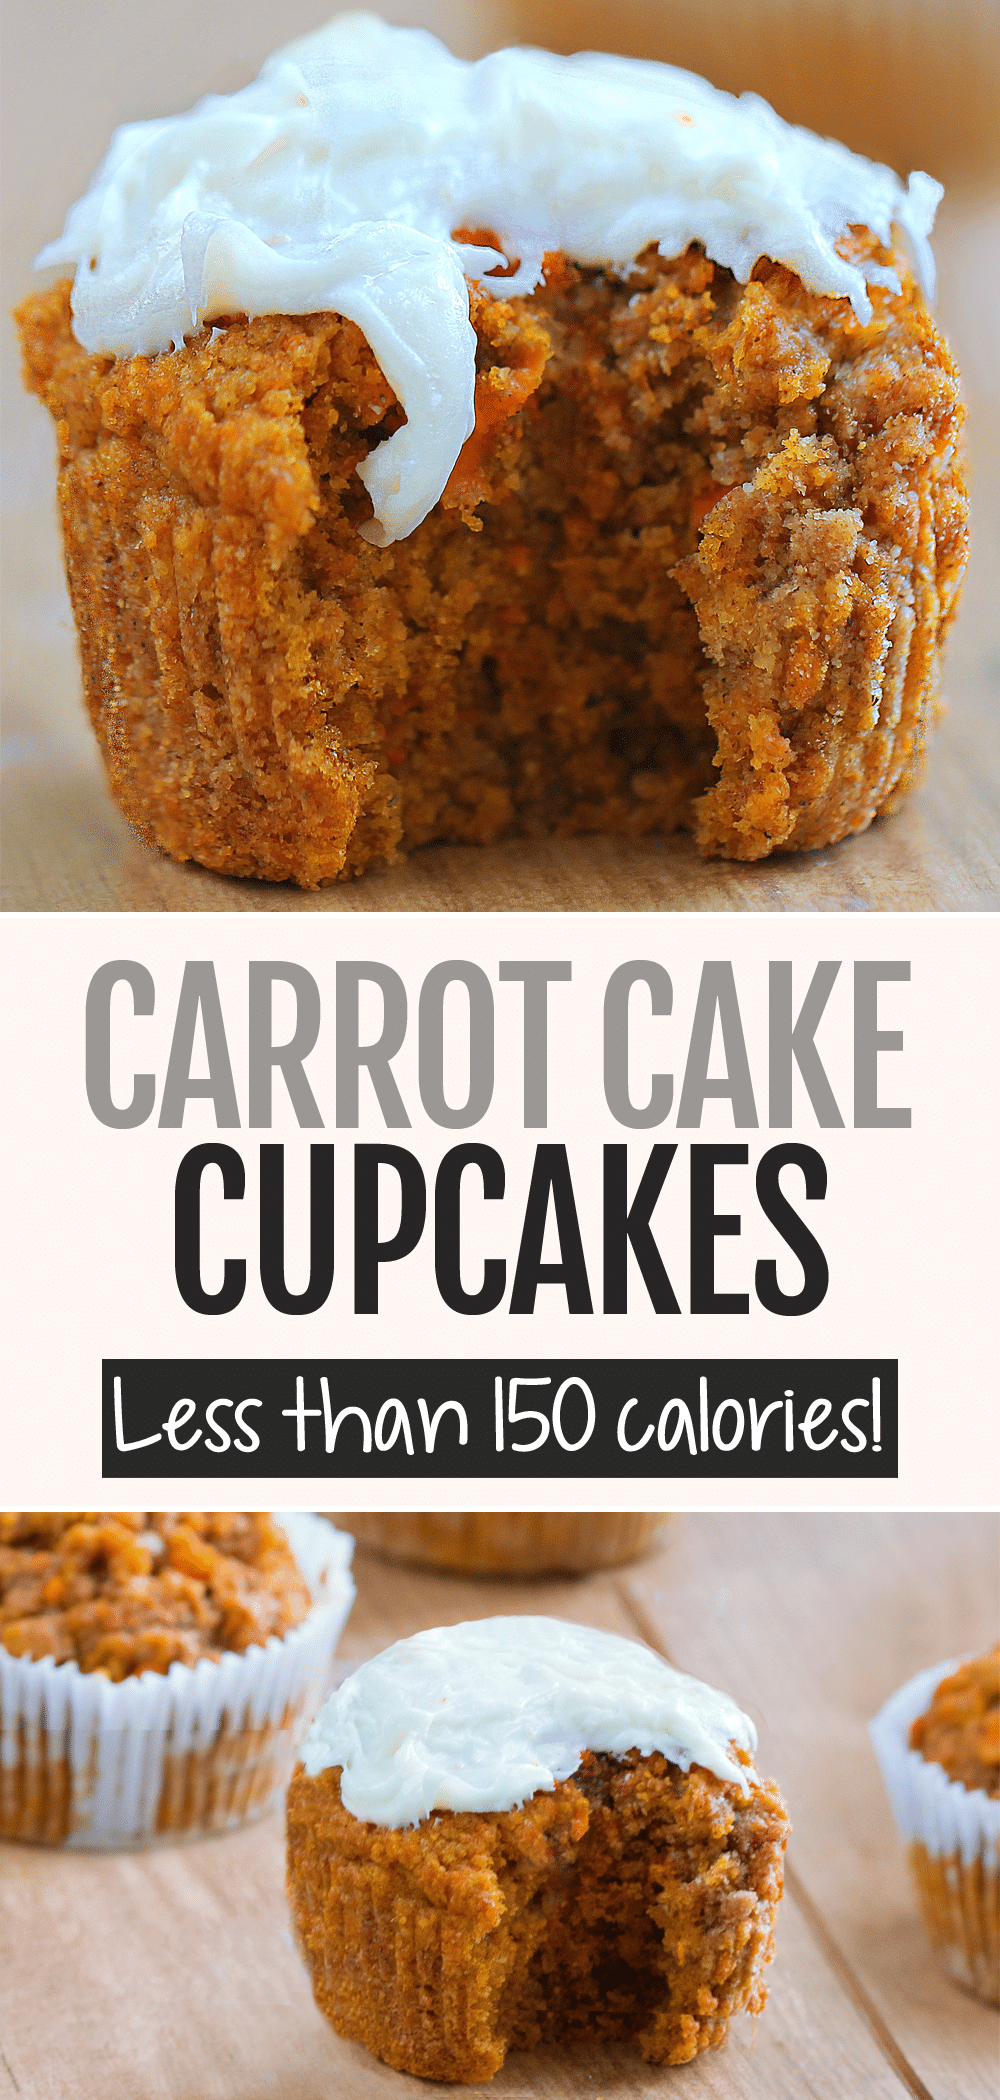 Healthy Carrot Cake Cupcakes - Low-Calorie, Low-Fat!